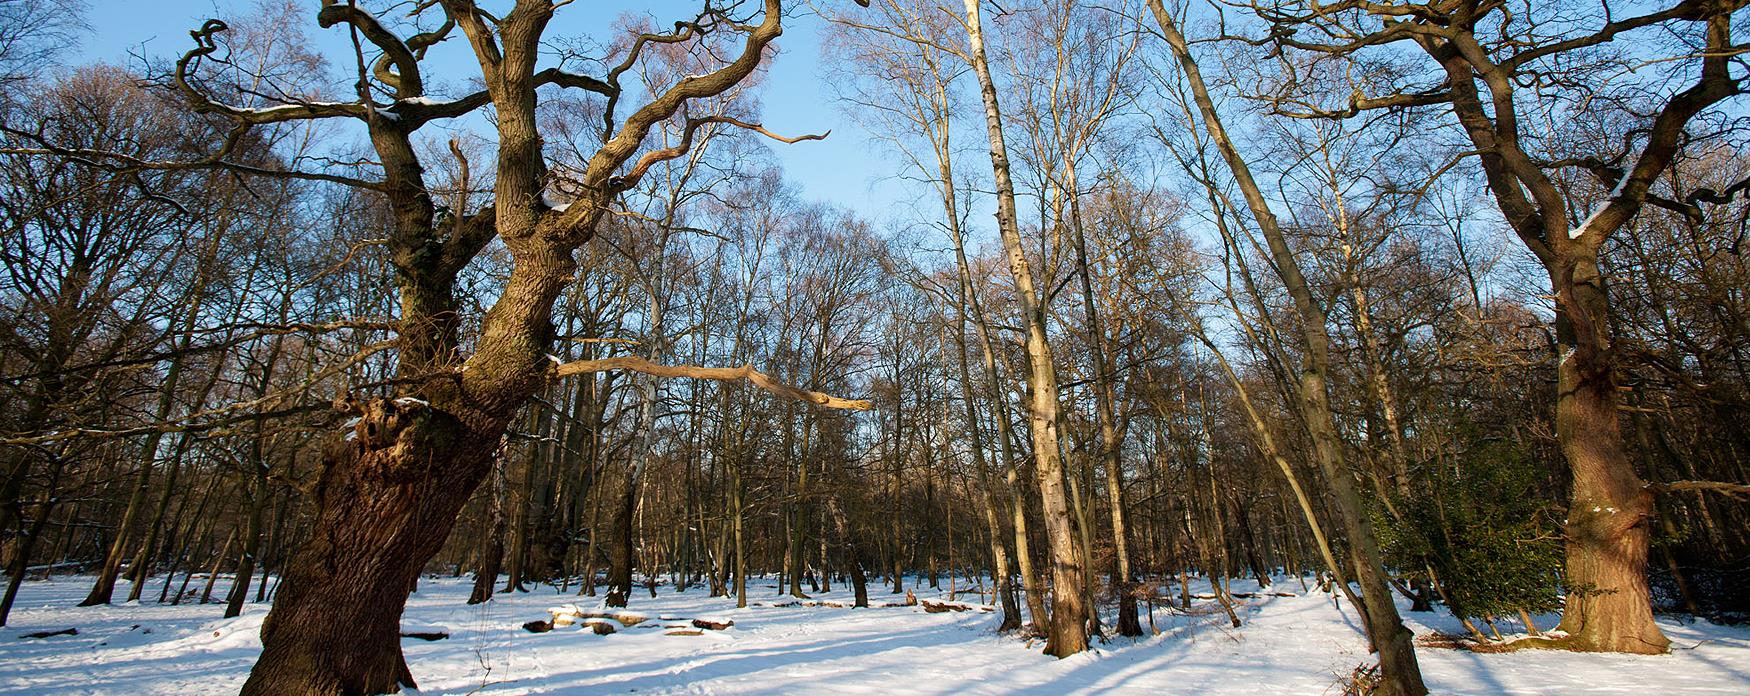 view of Epping Forest trees covered in snow